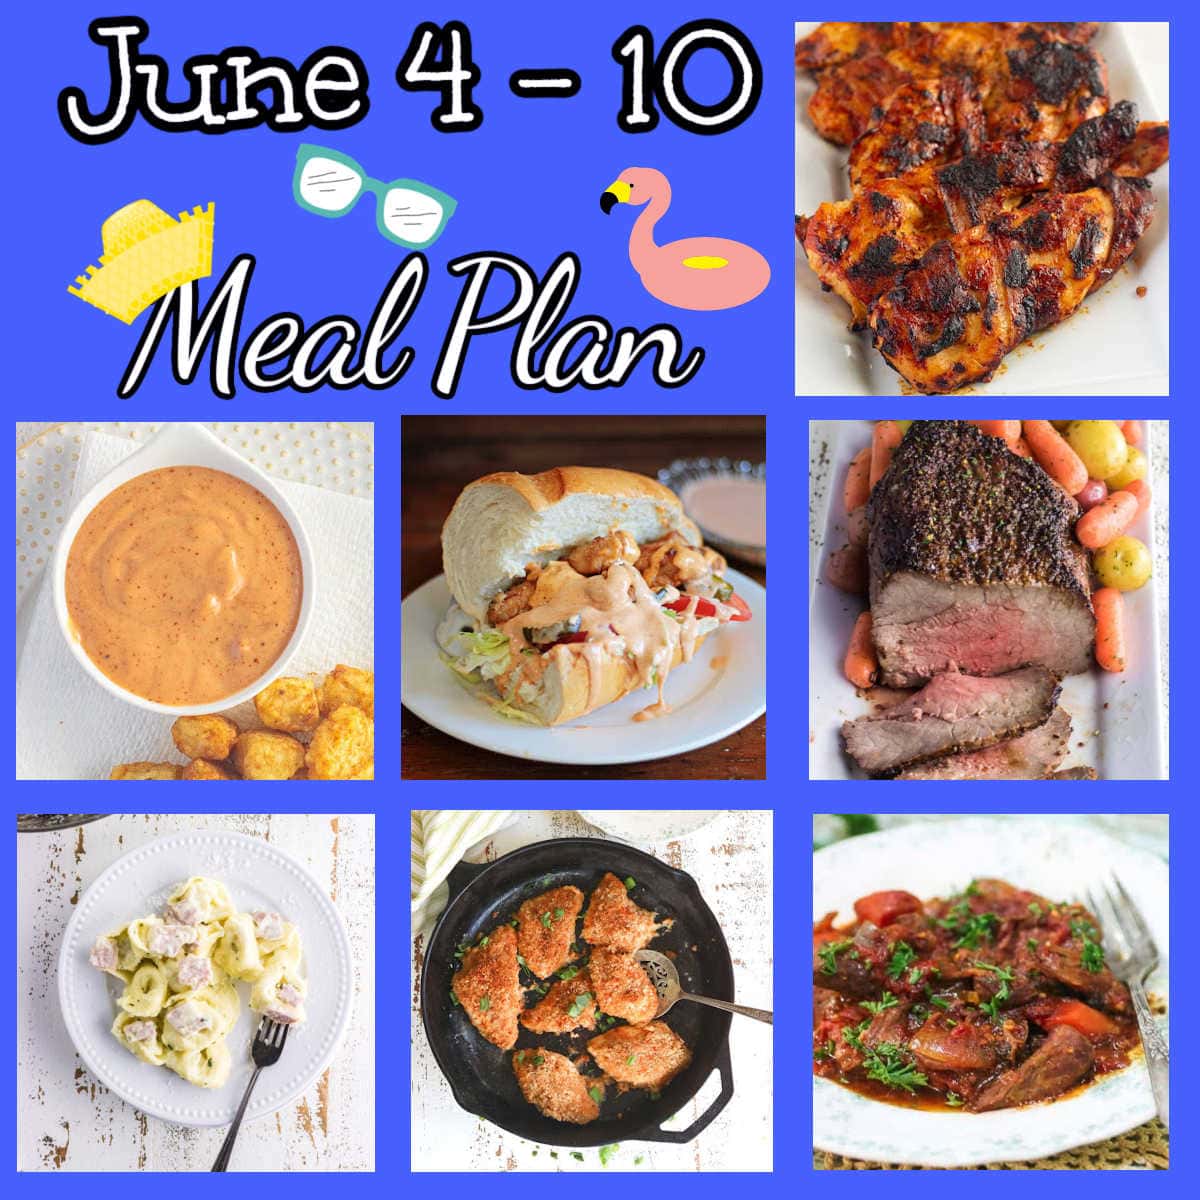 A collage of images from this meal plan on a blue background.